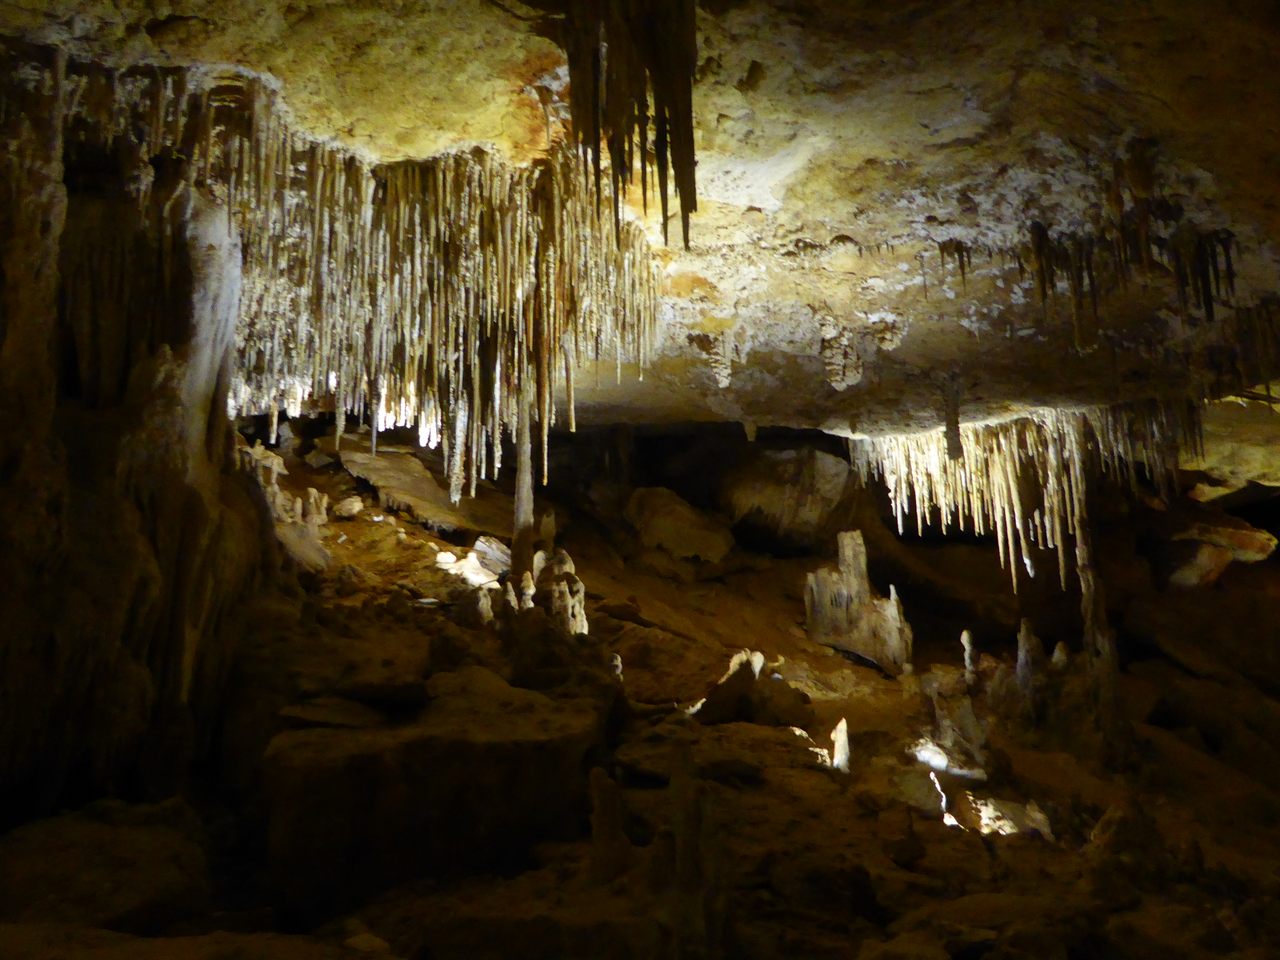 Part of the Victoria Fossil Cave network, where the prehistoric marsupials were found.